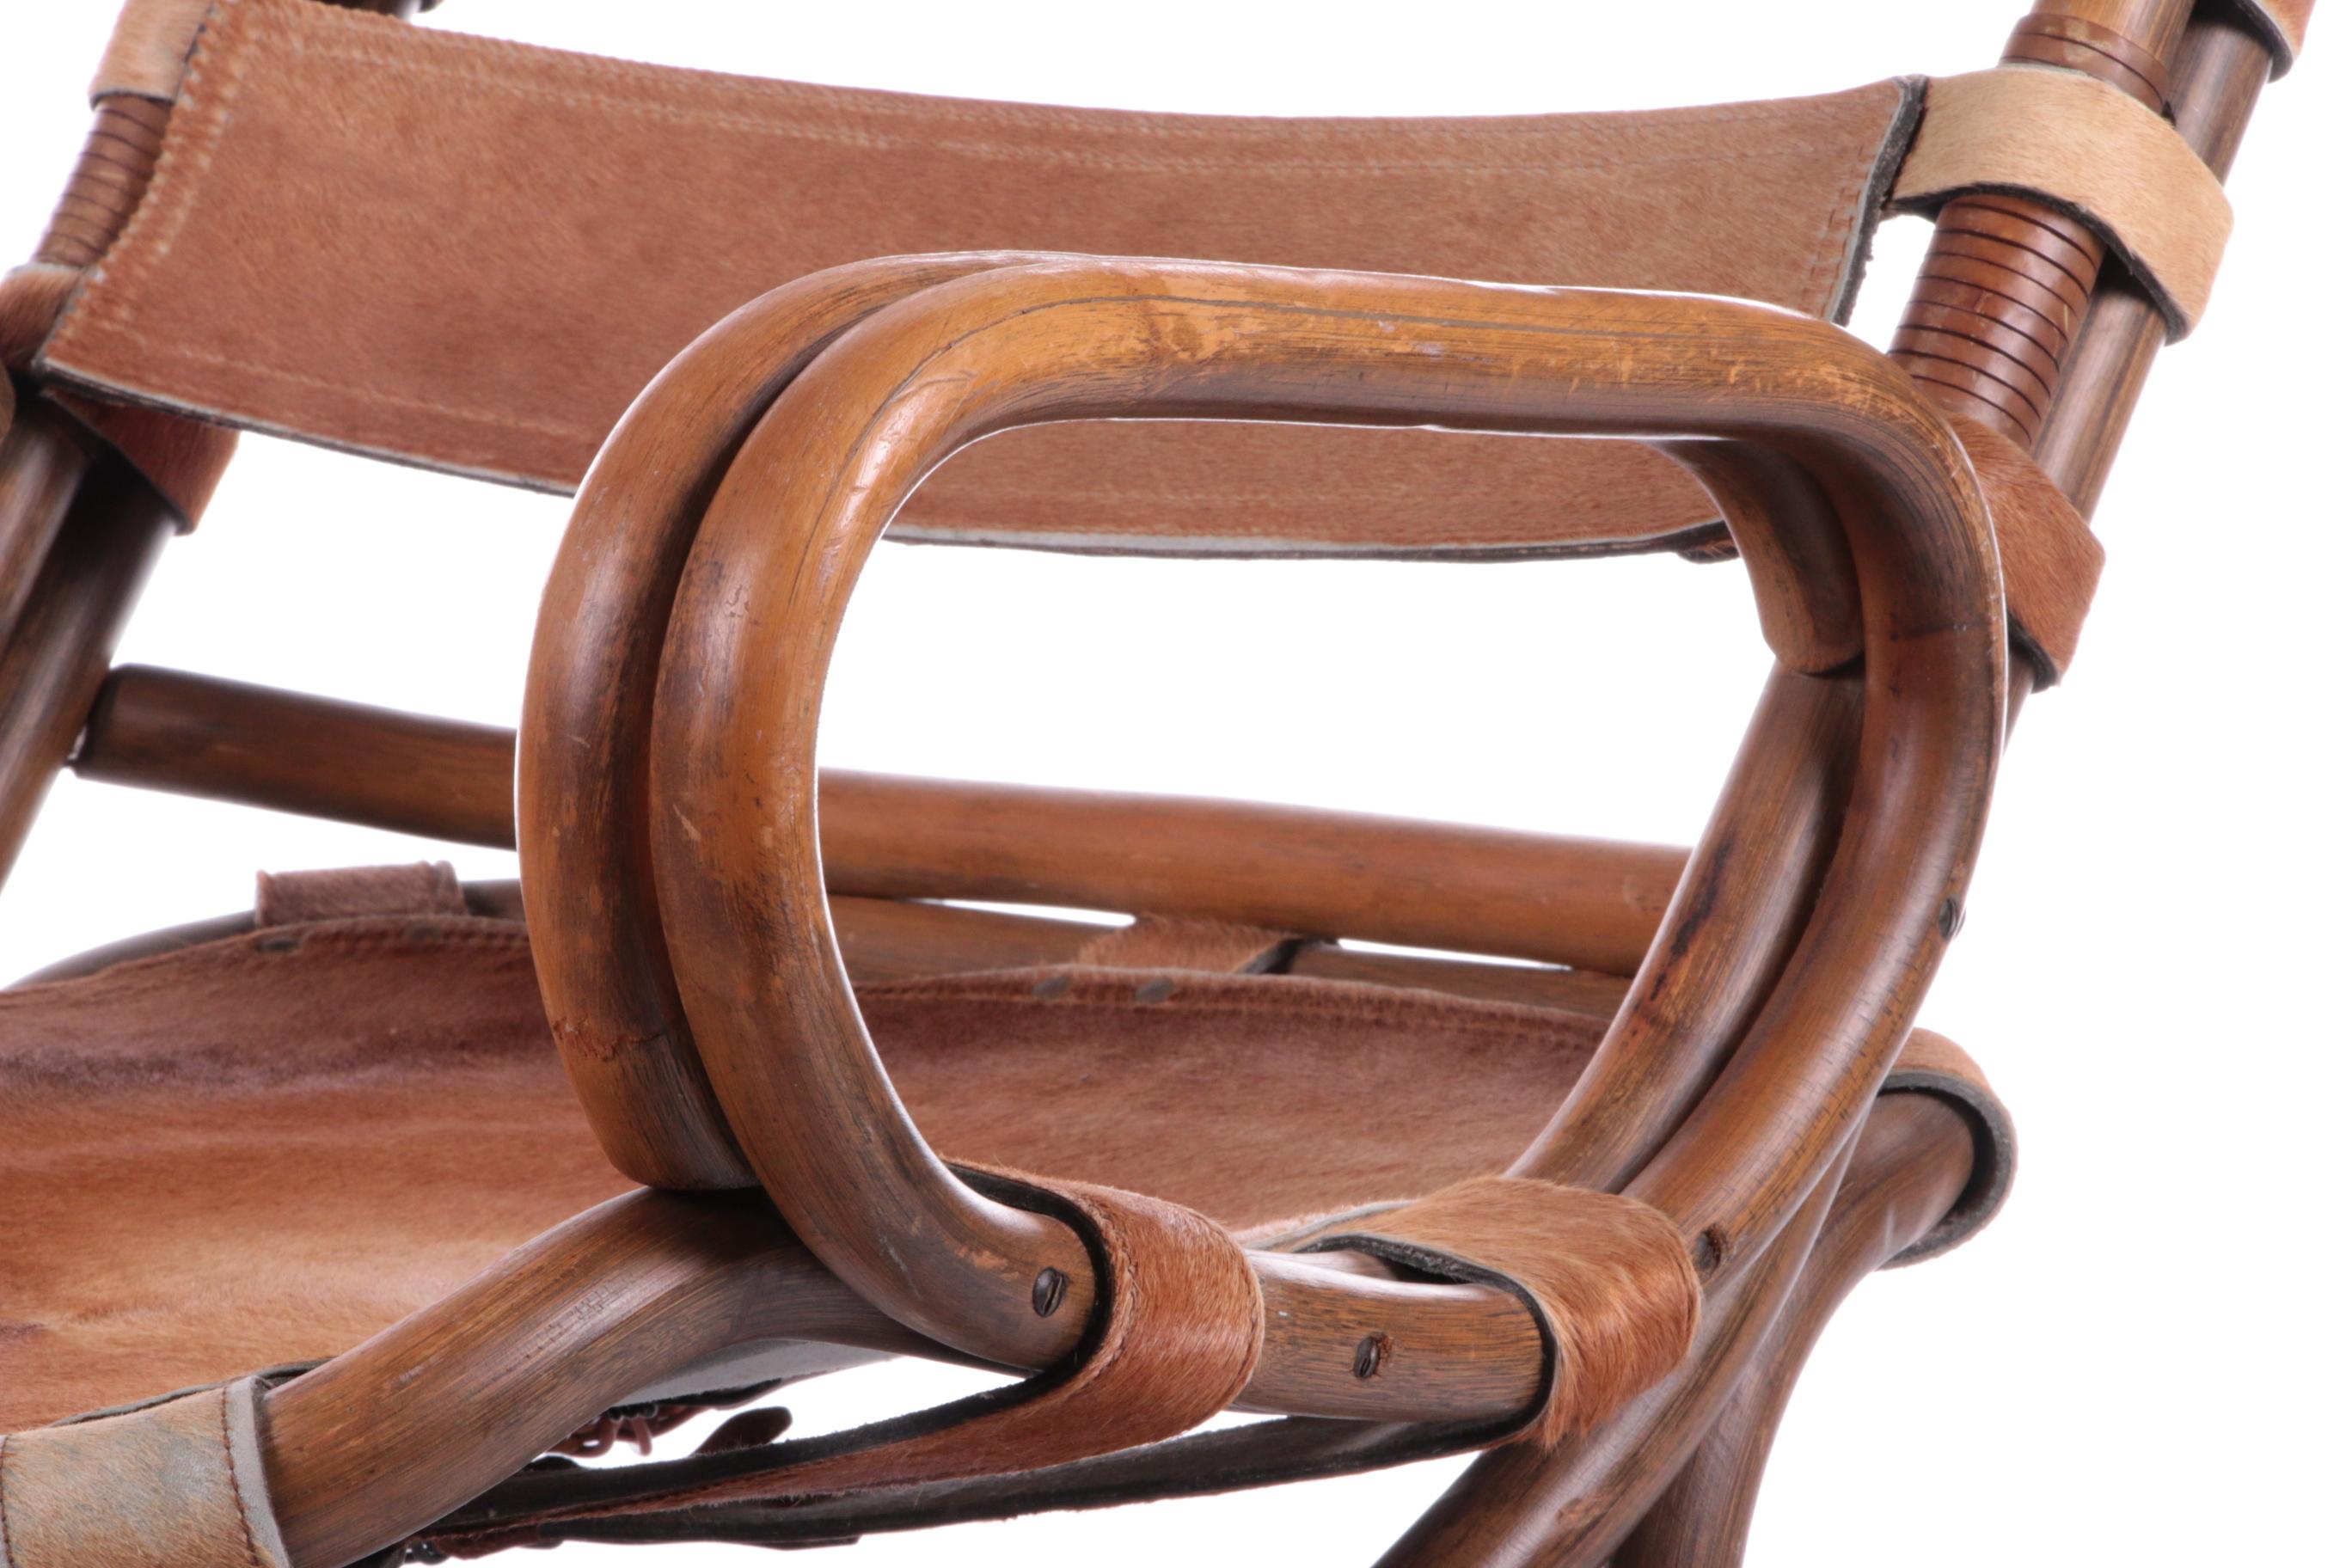 Tito Agnoli Relax Chair Made of Bamboo and Leather, 1960 For Sale 3